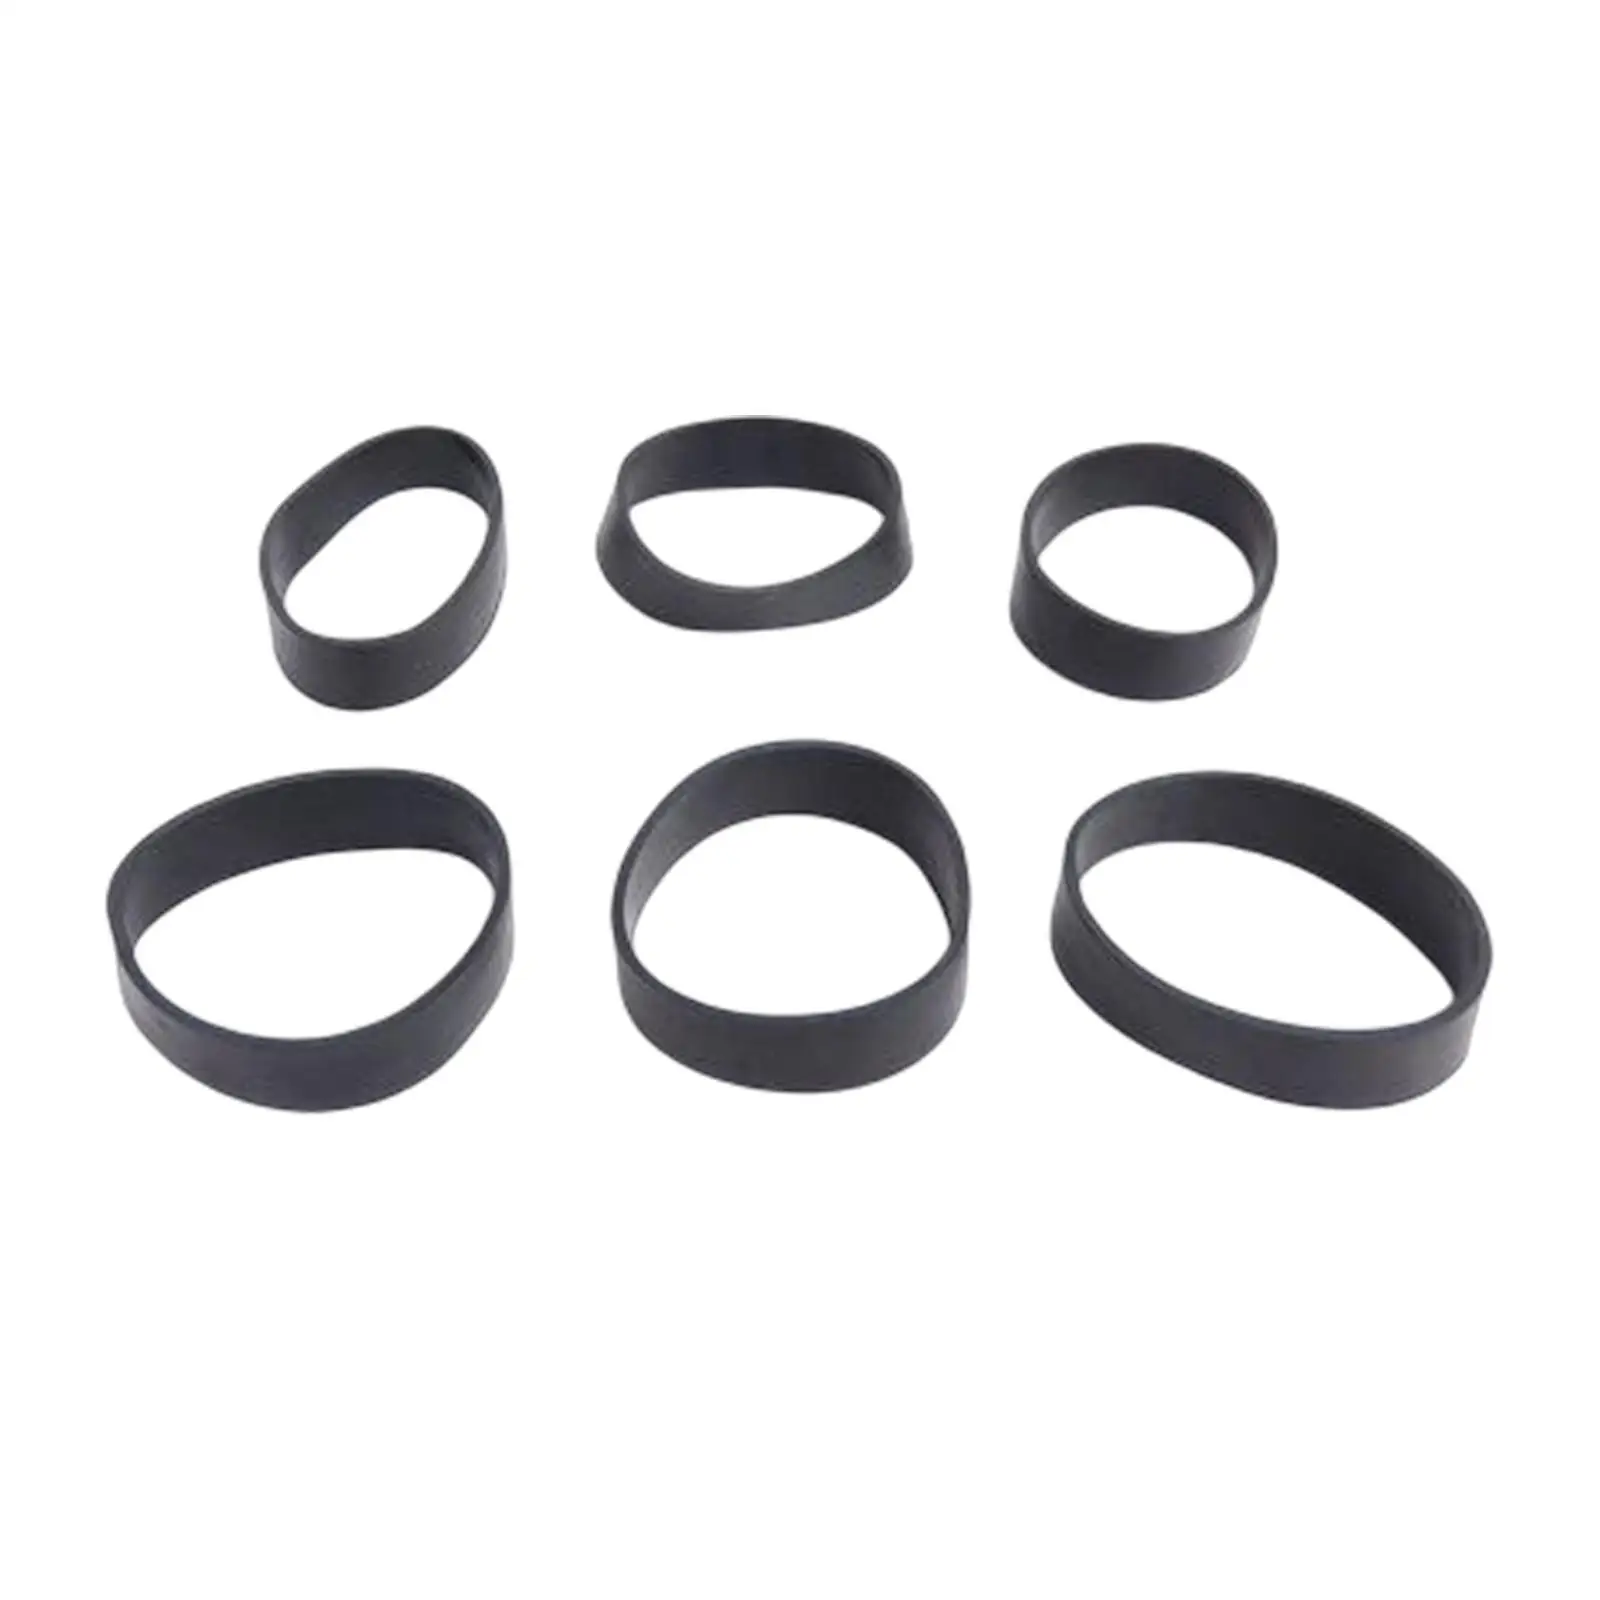 6 Pieces Rubber Fixing Band Sealed for Enthusiast Diver Diving Equipment